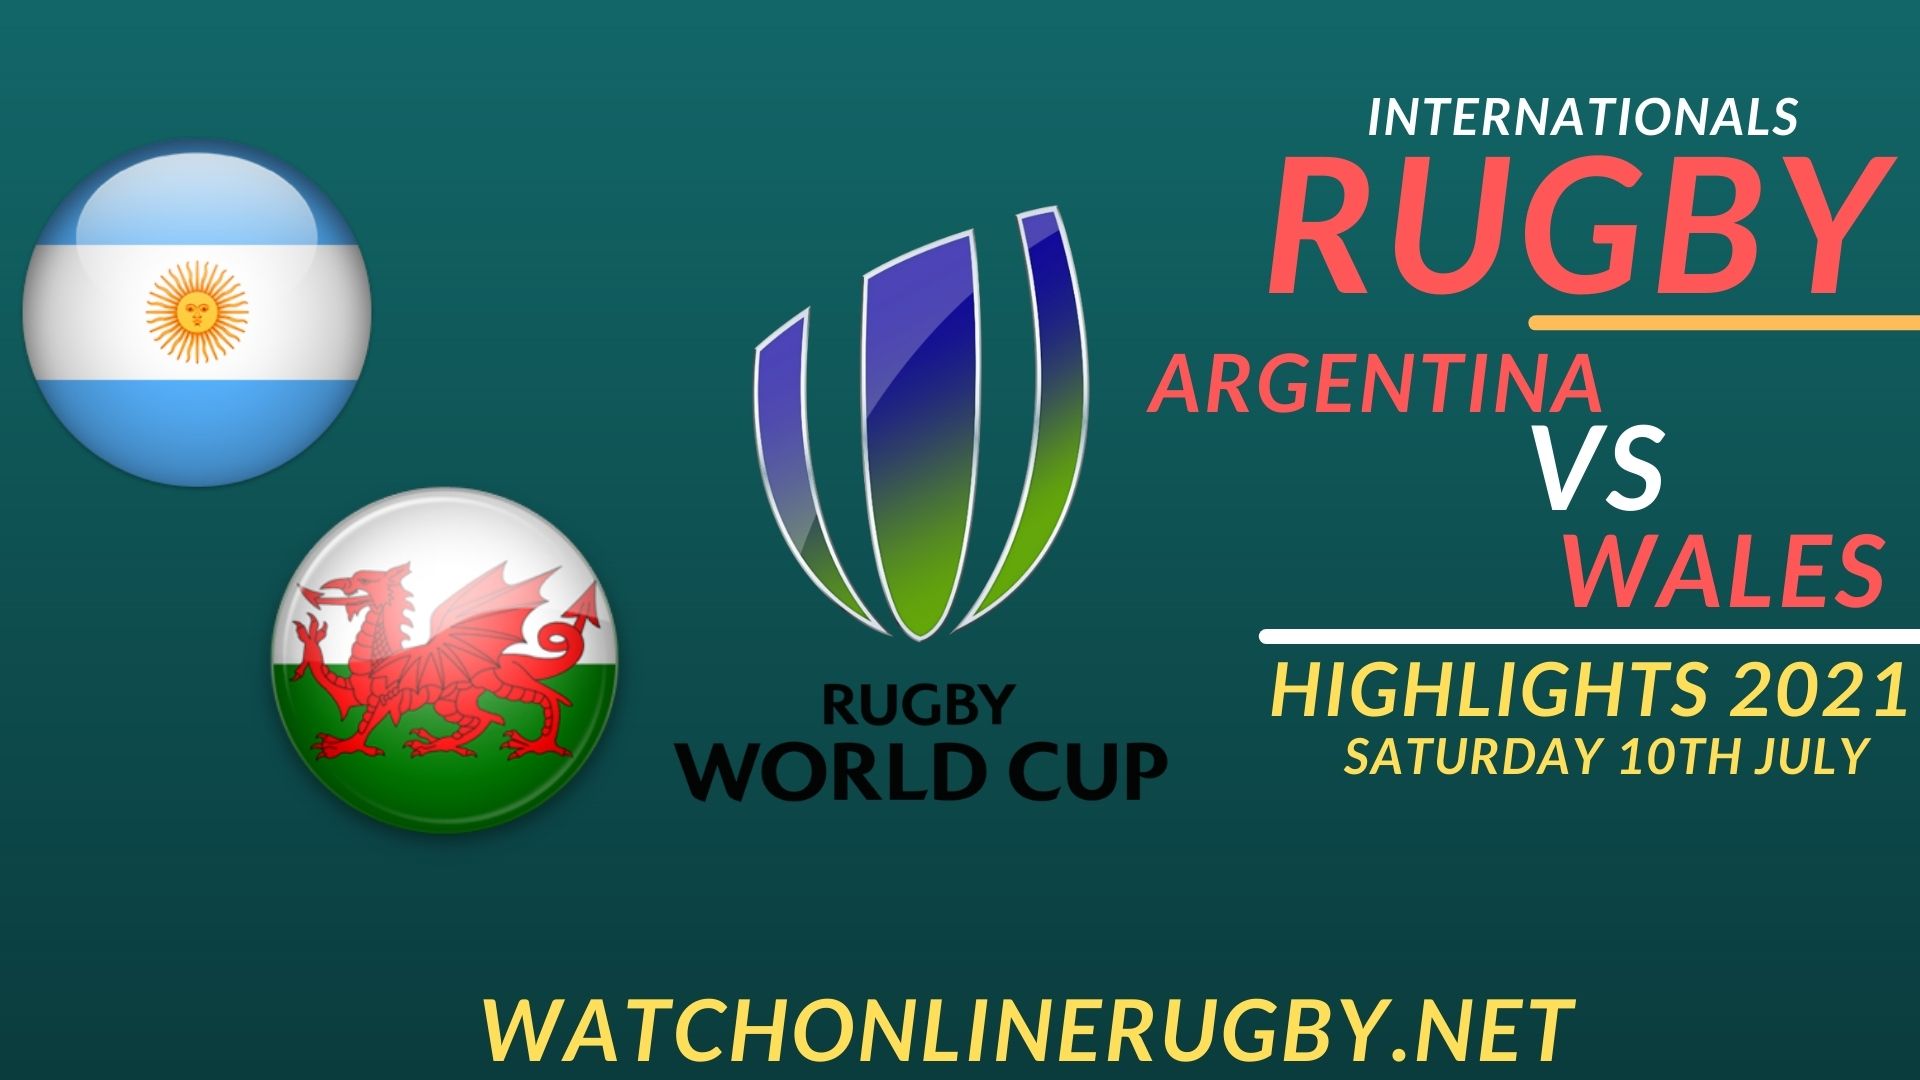 Argentina Vs Wales International Rugby 2021